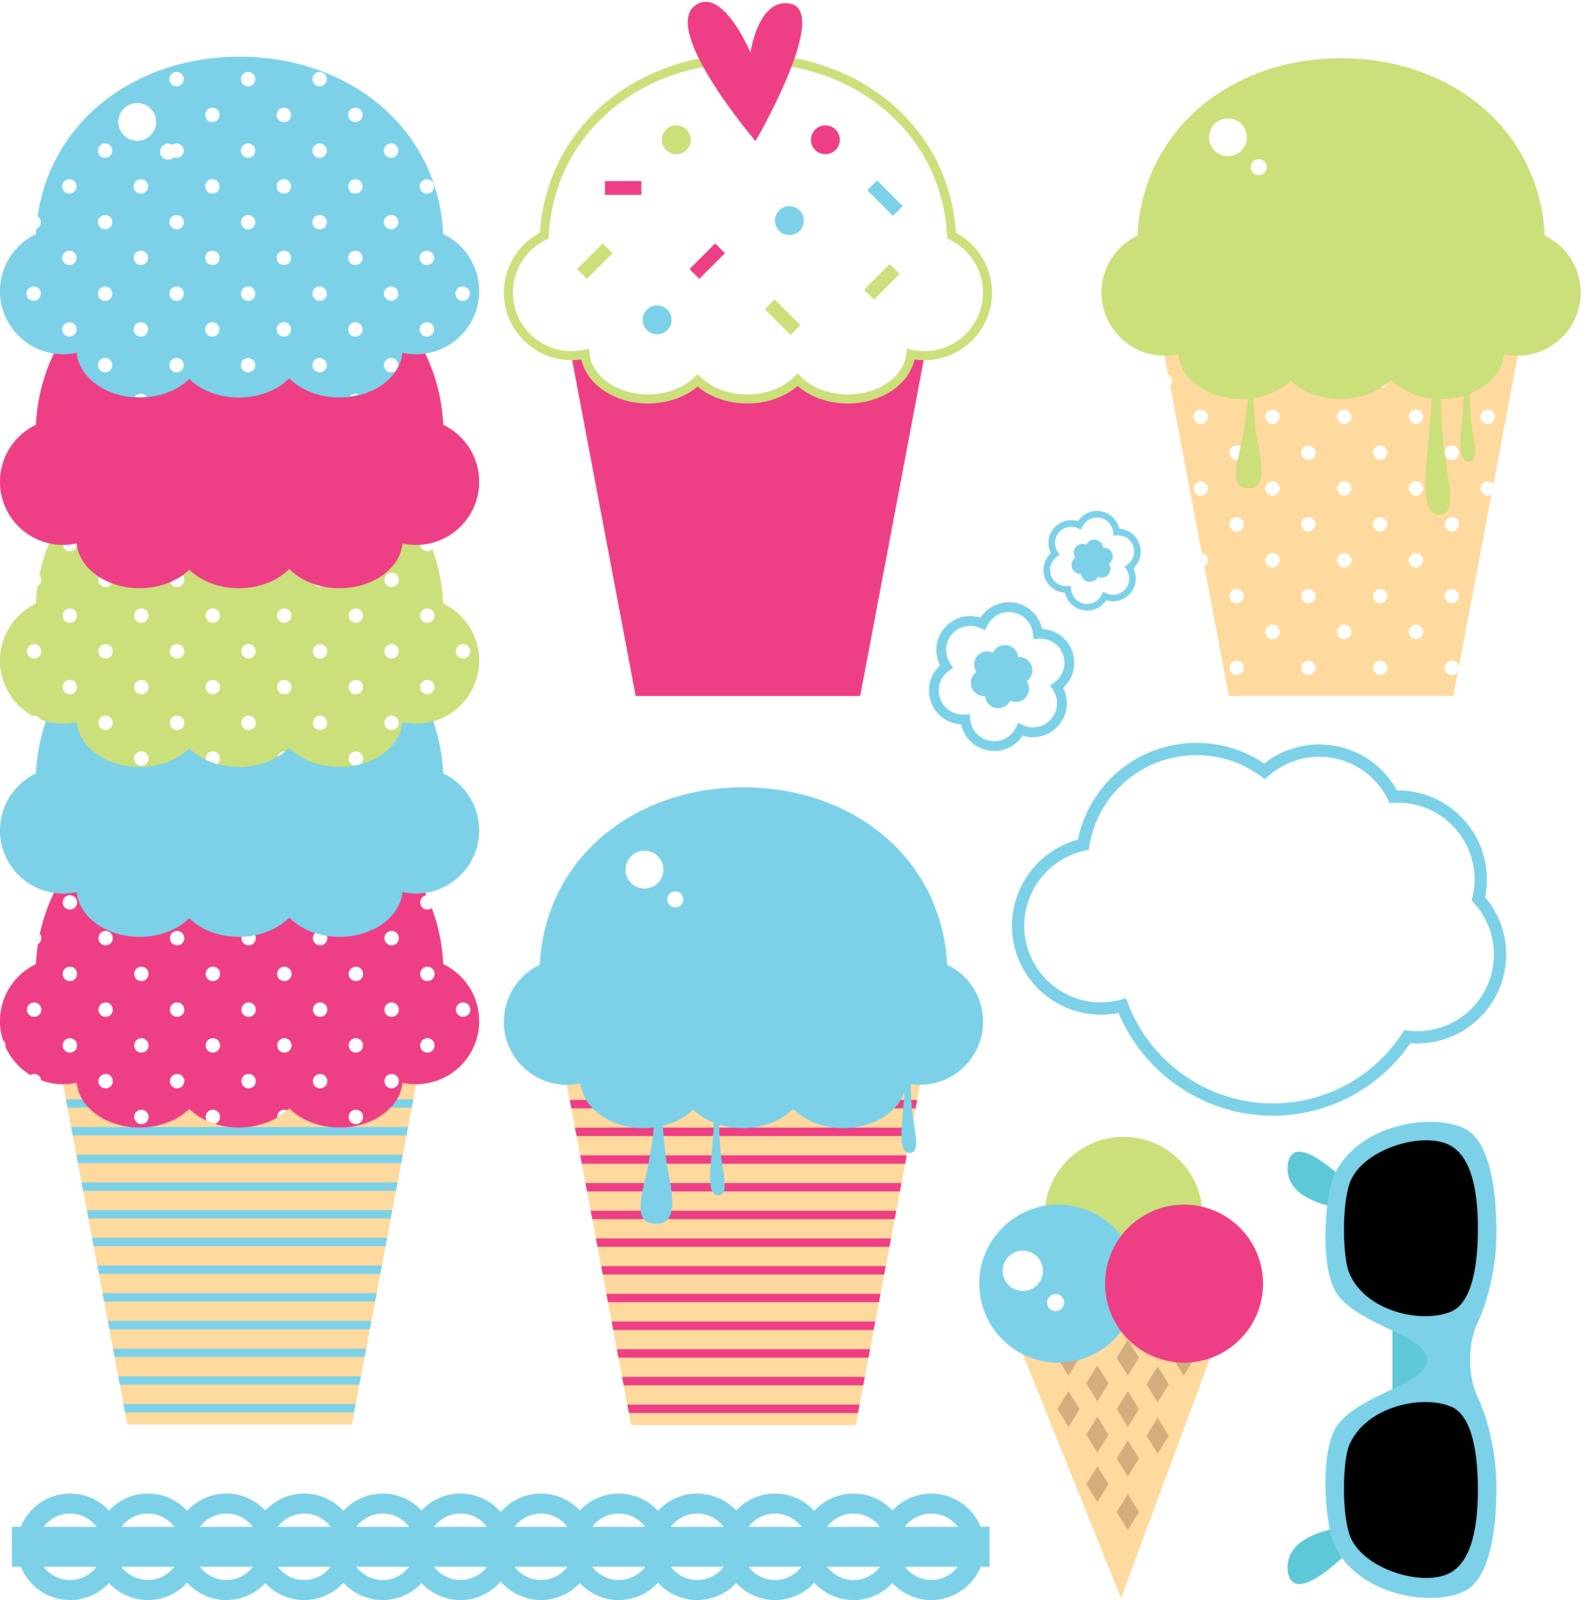 Design collection of summer colorful ice creams by Lordalea